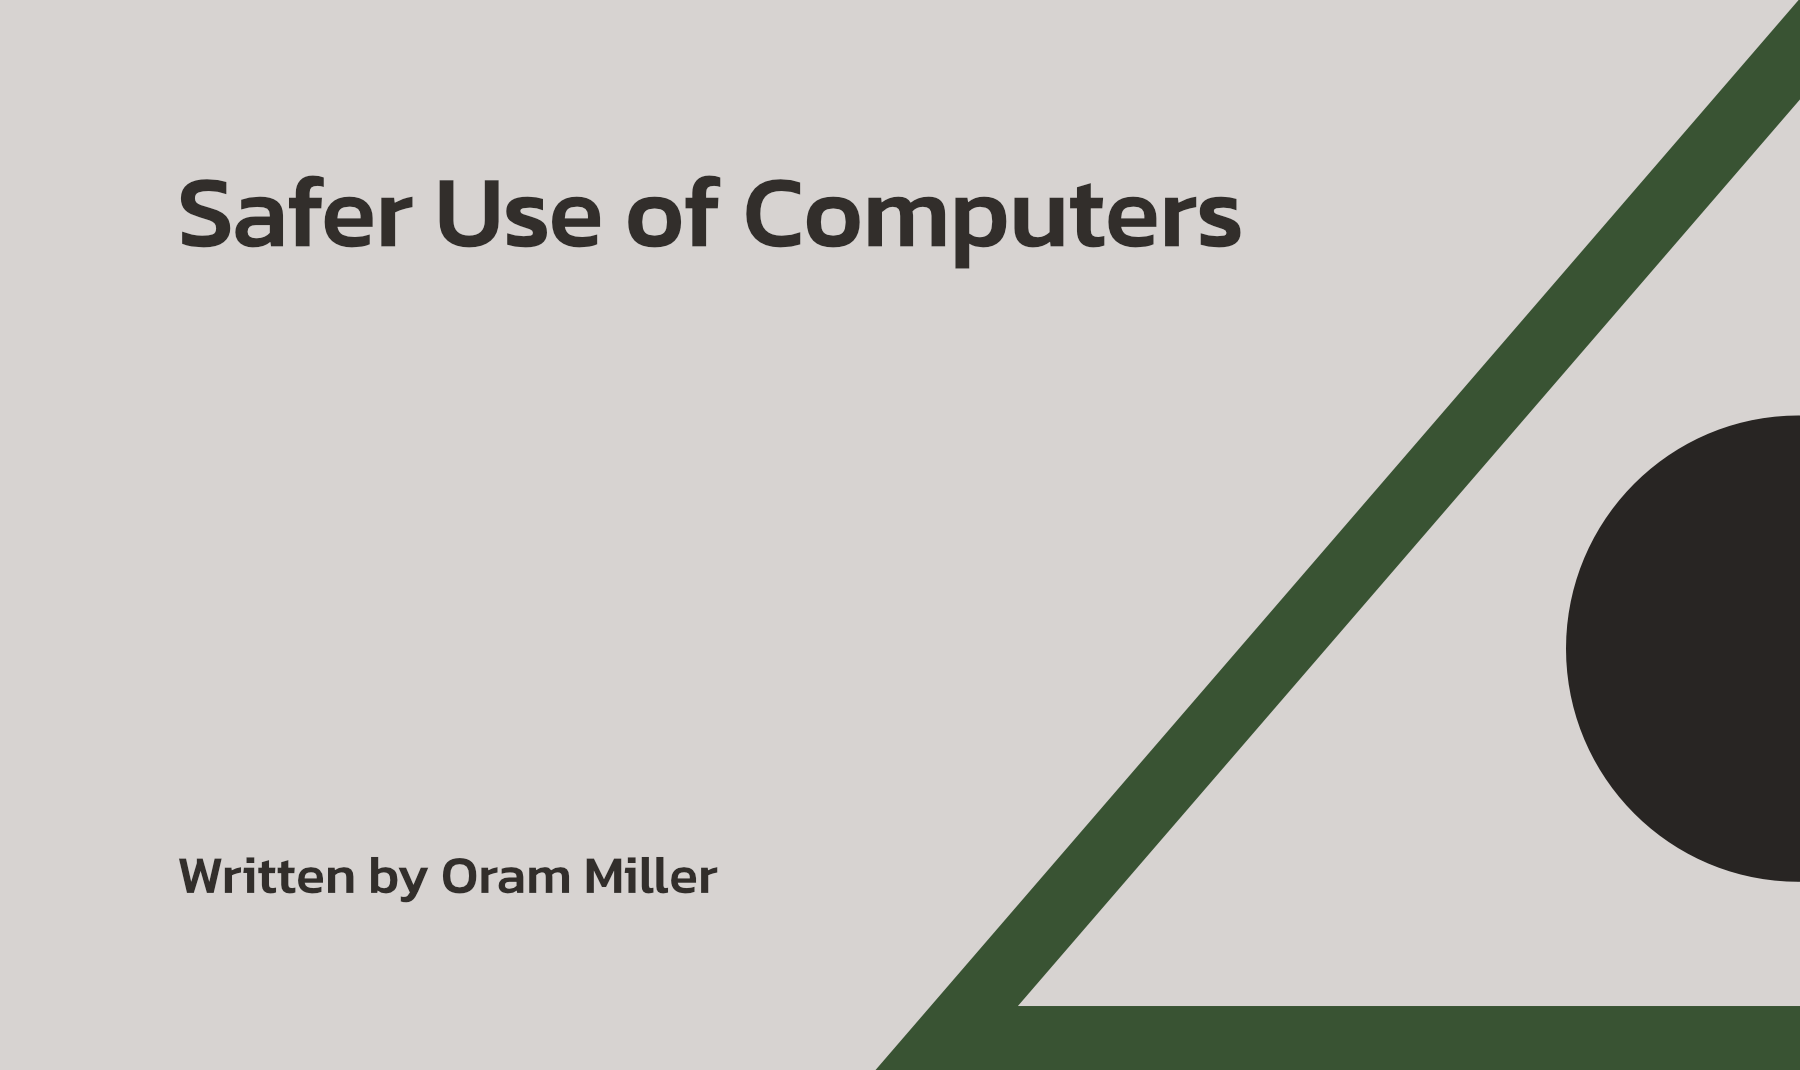 Safer Use of Computers